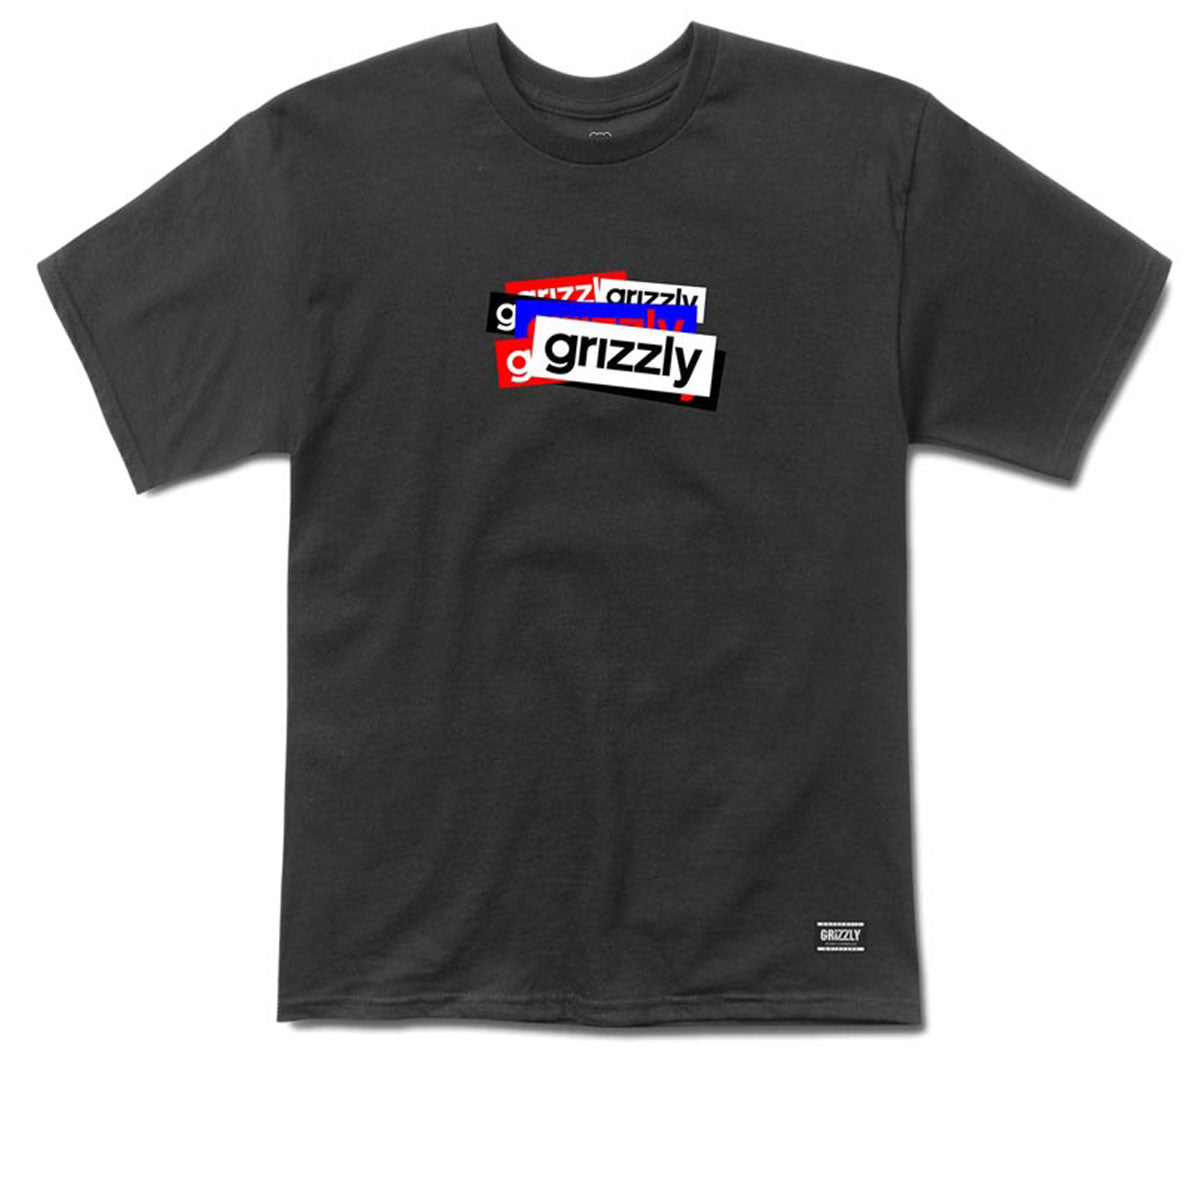 Grizzly Overlap T-Shirt - Black image 1